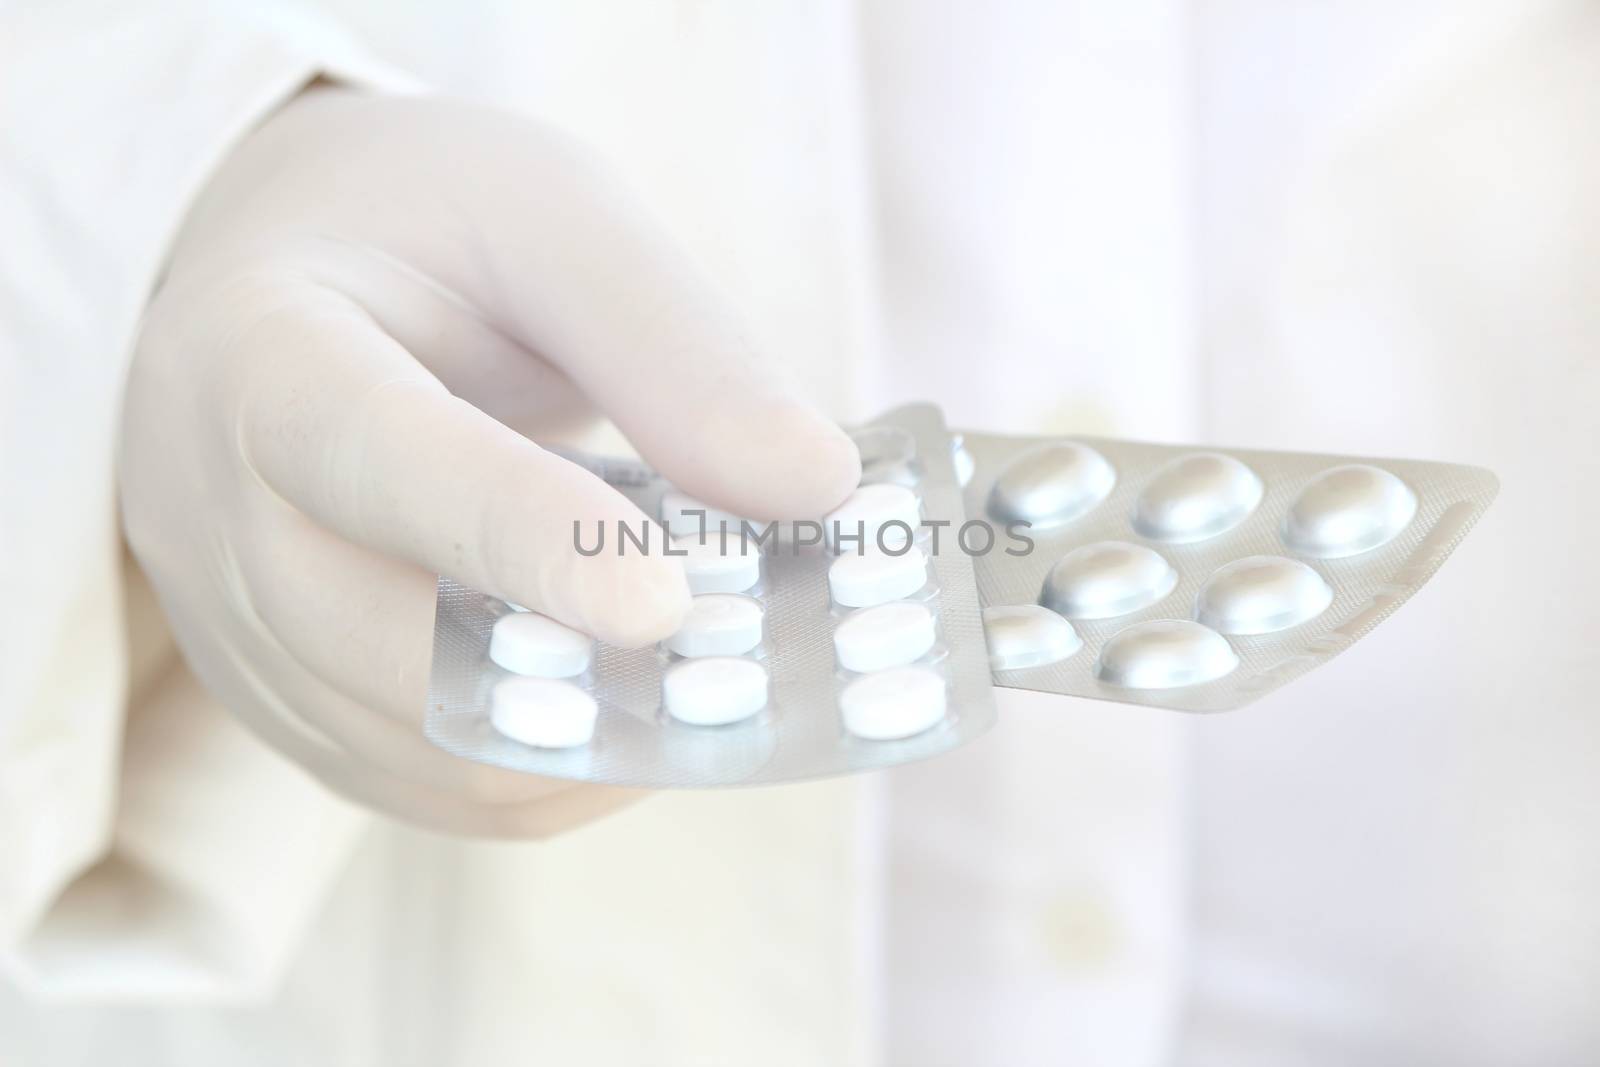 Hand in surgical glove holding pill blisters by soniabonet